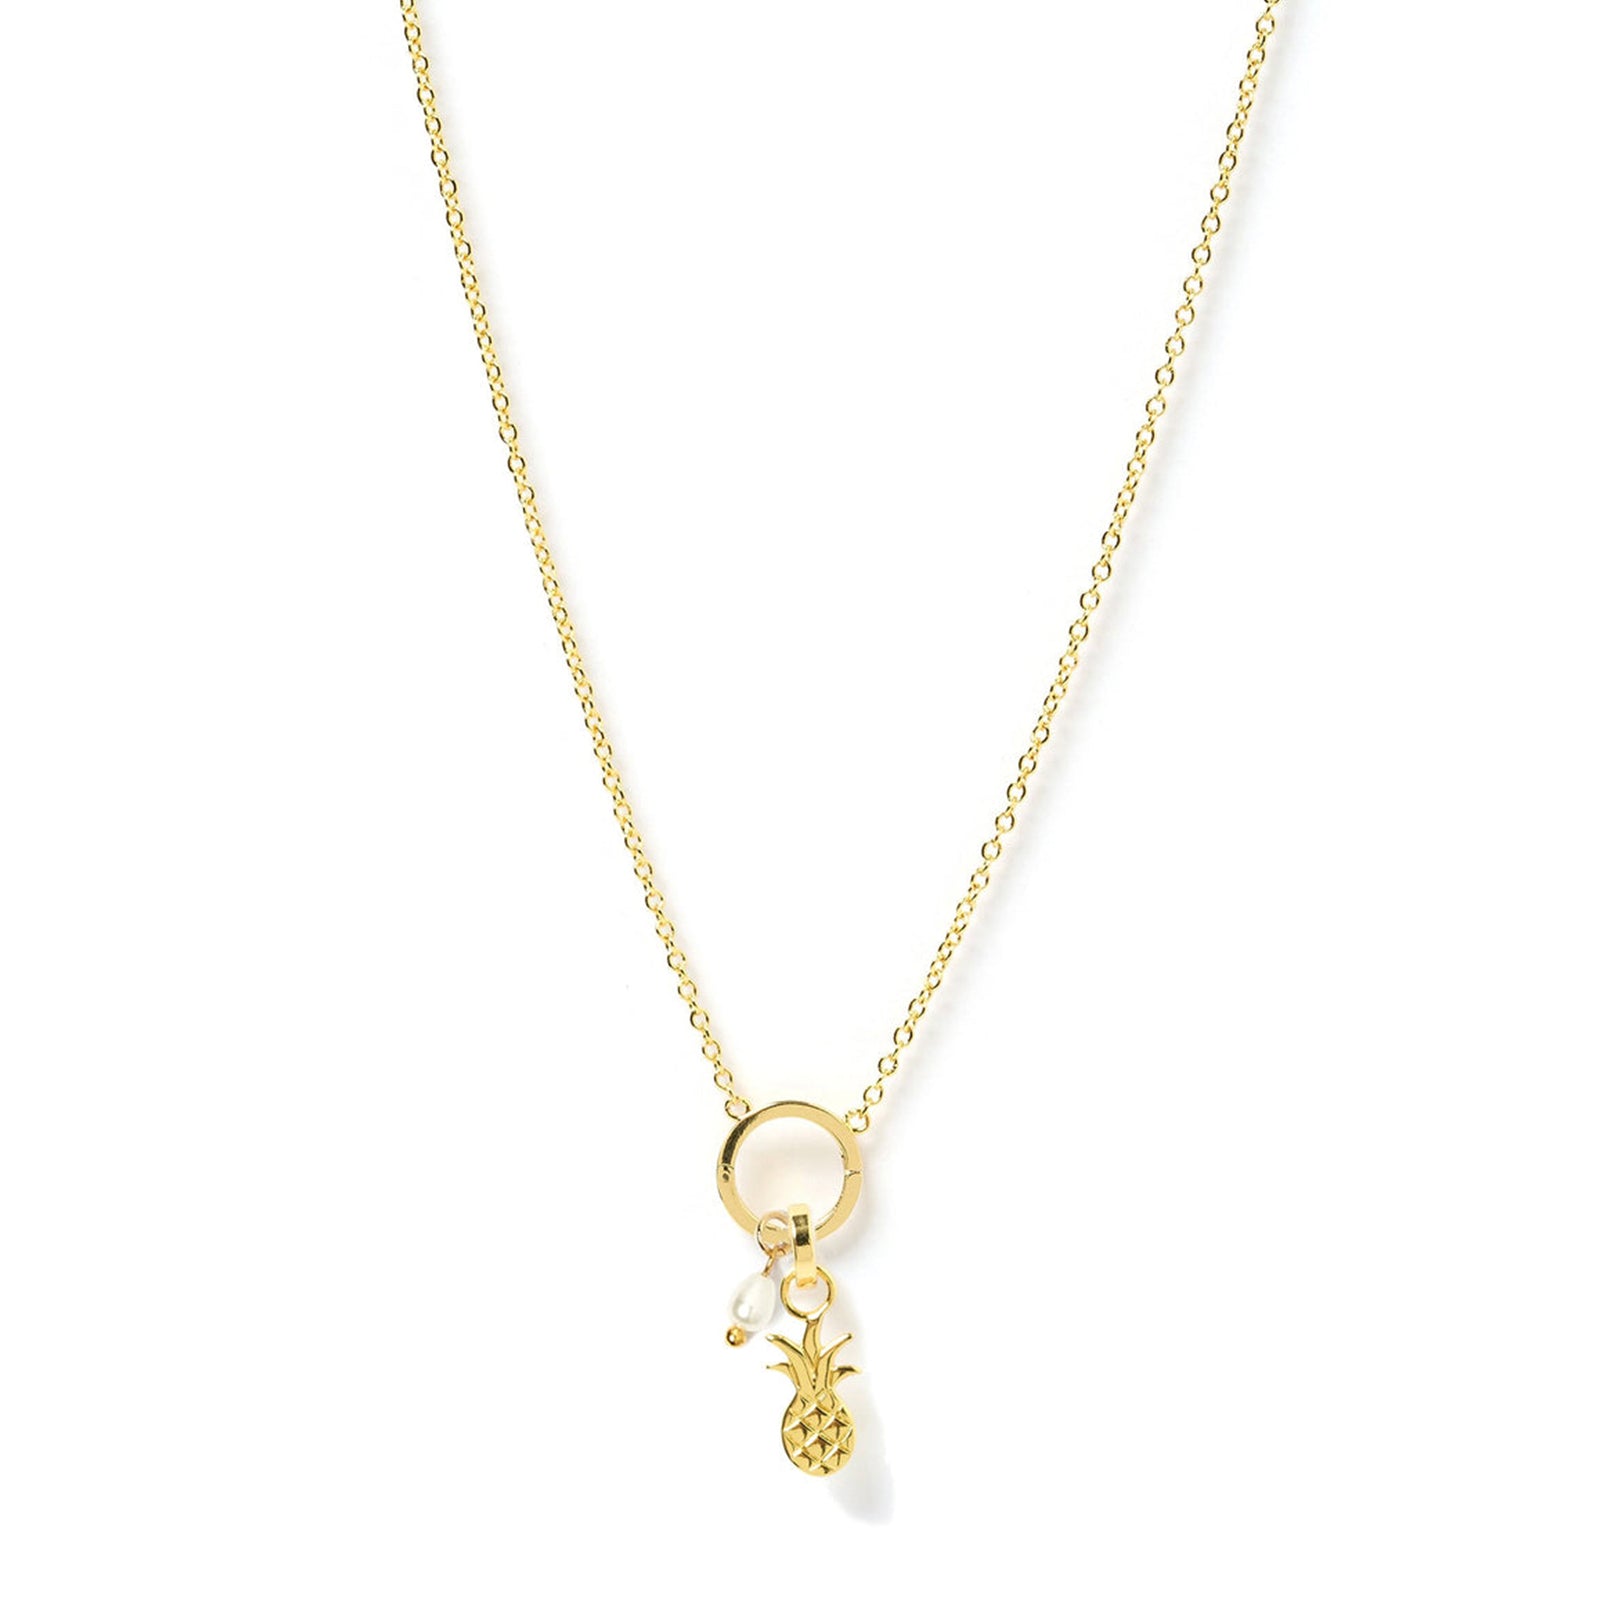 Arms Of Eve stylish gold Ananas 'O' charm necklace with pineapple charm